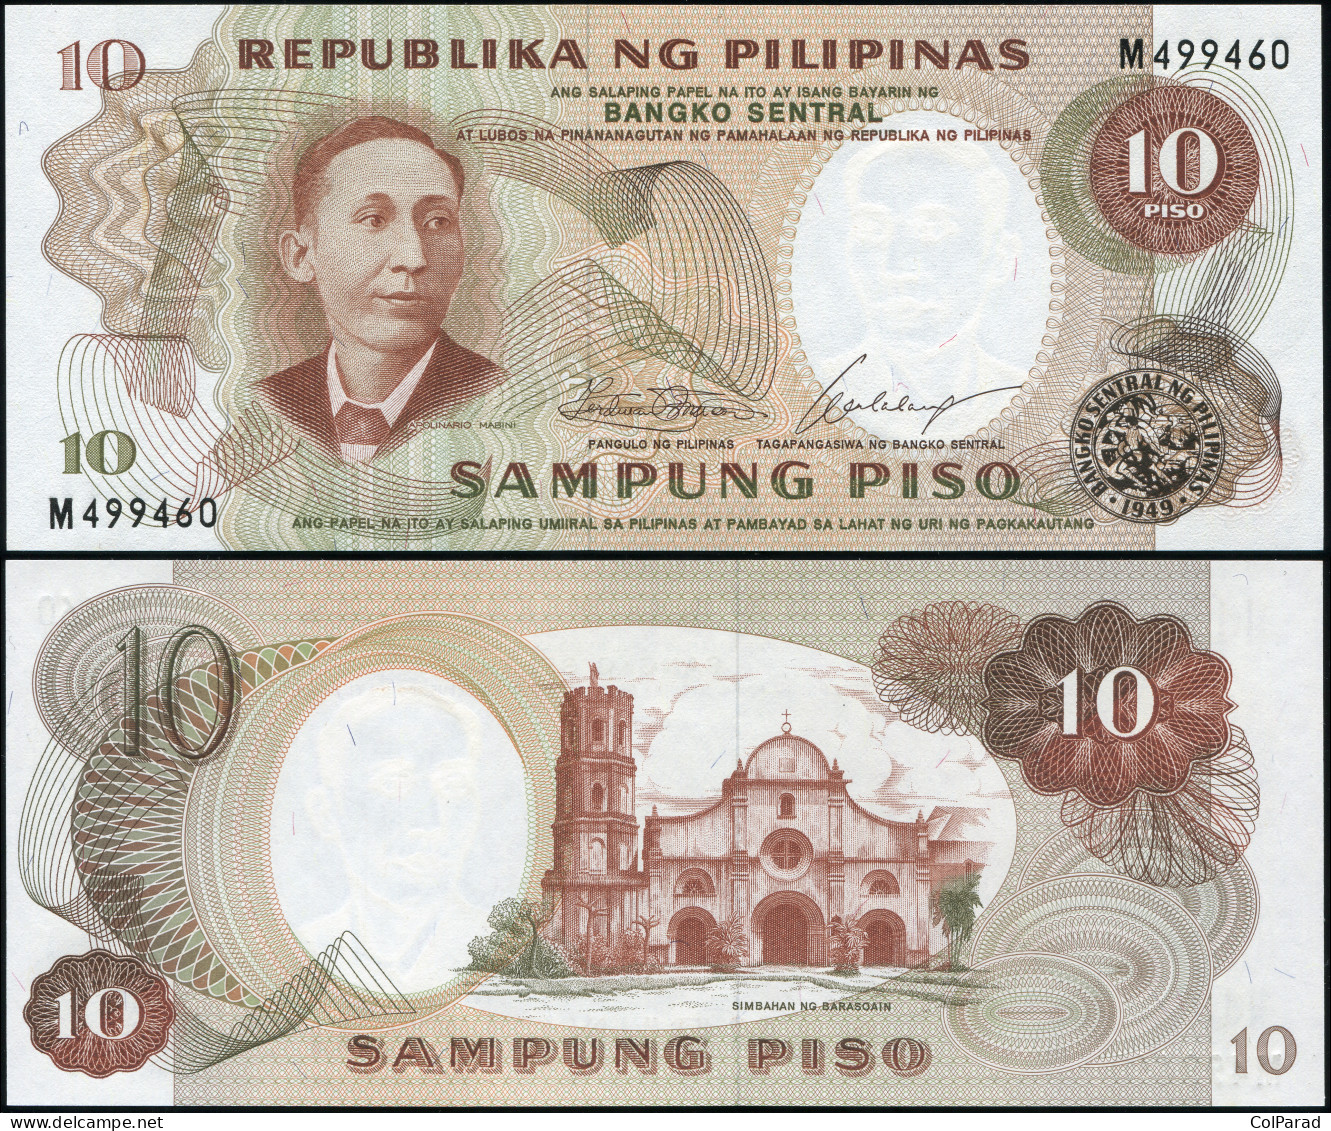 PHILIPPINES 10 PISO - ND (1969) - Paper Unc - P.144a Banknote - Philippinen